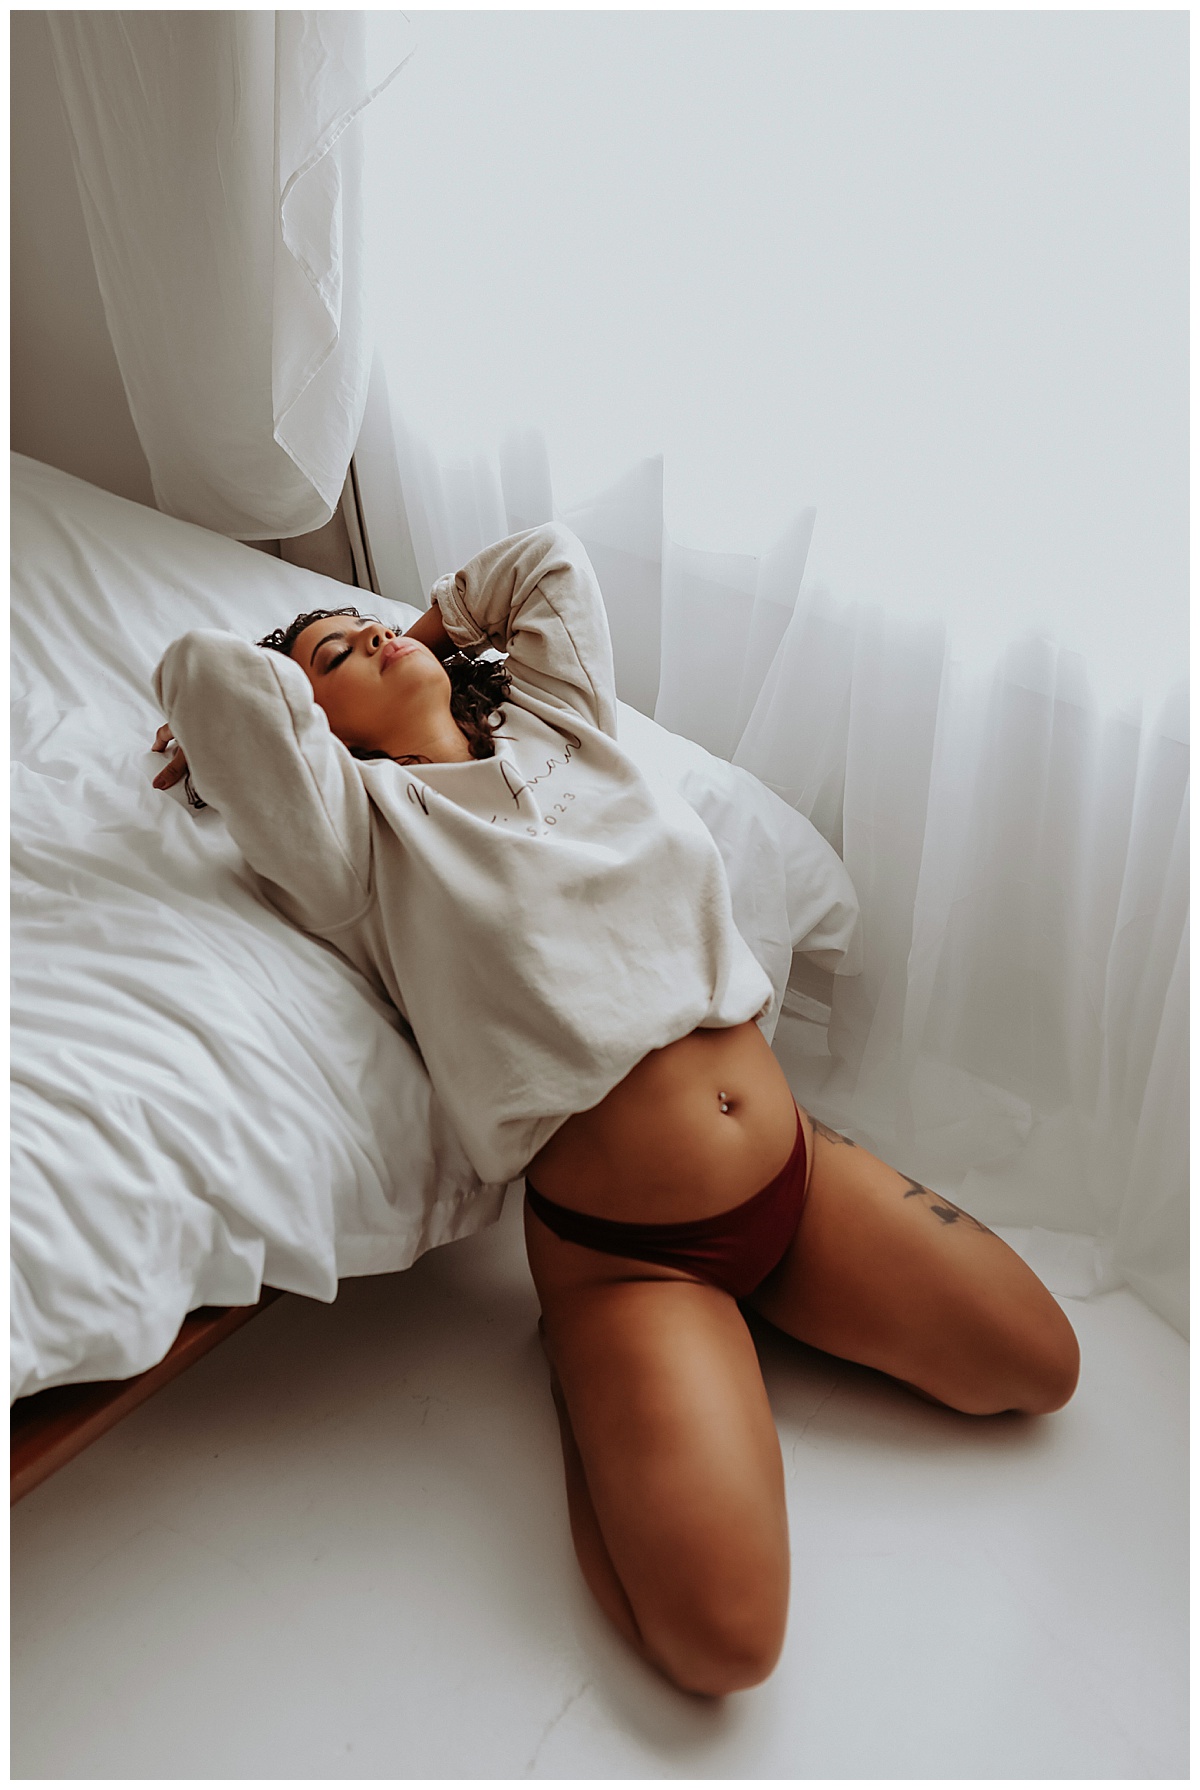 Lady in sweater leans over edge of bed for Mary Castillo Photography